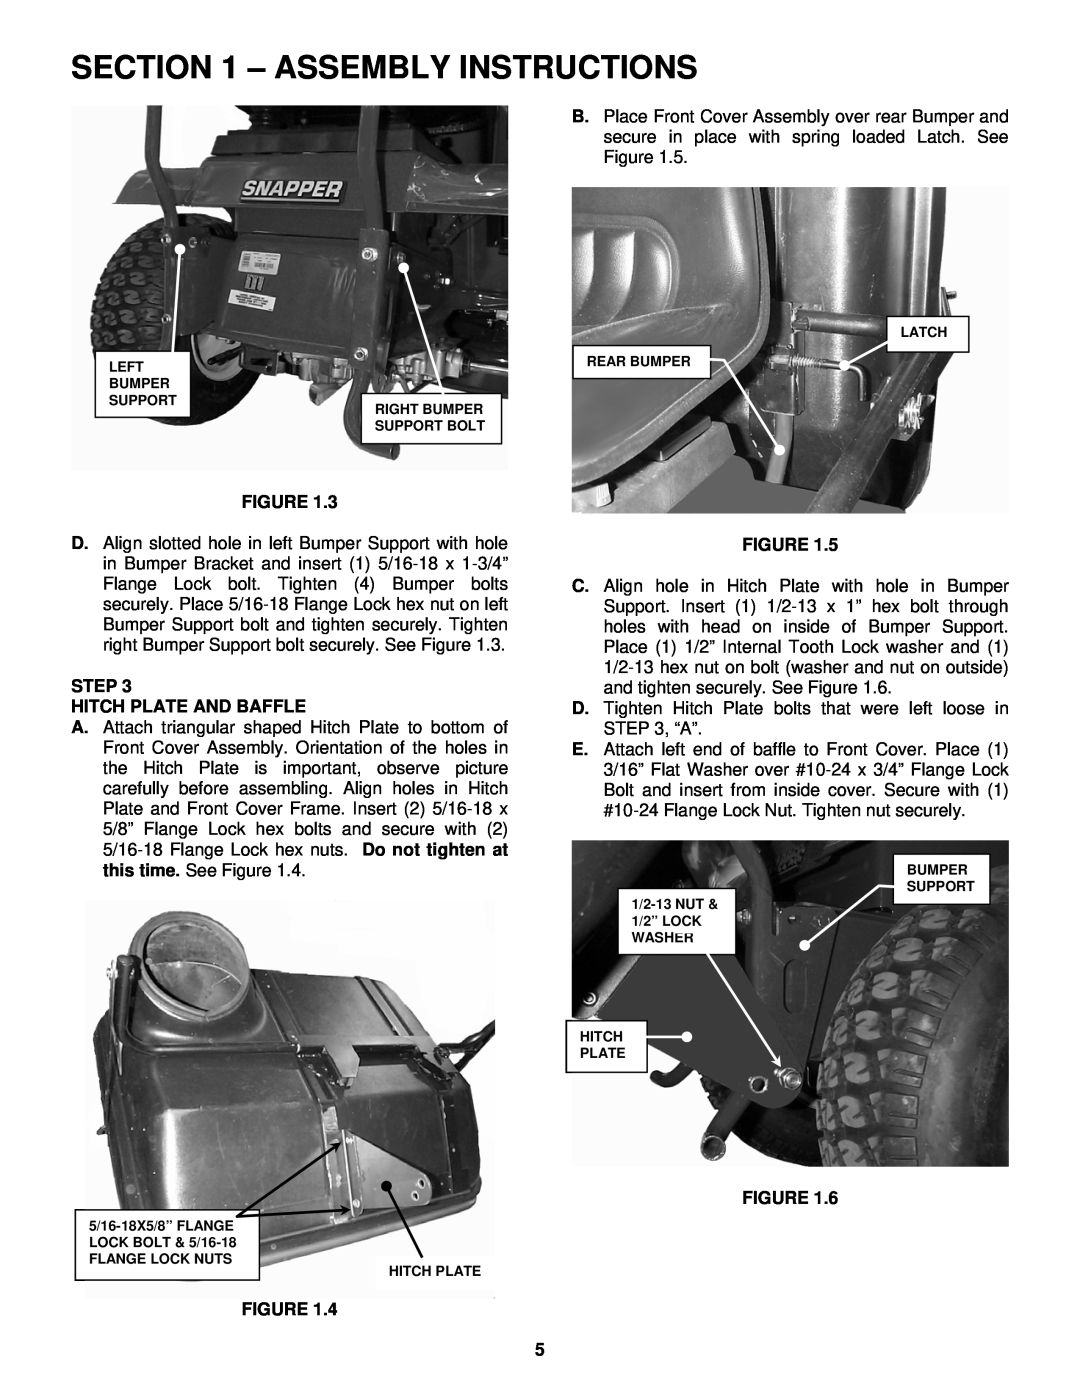 Snapper 6-3131 manual Step Hitch Plate And Baffle, Assembly Instructions 